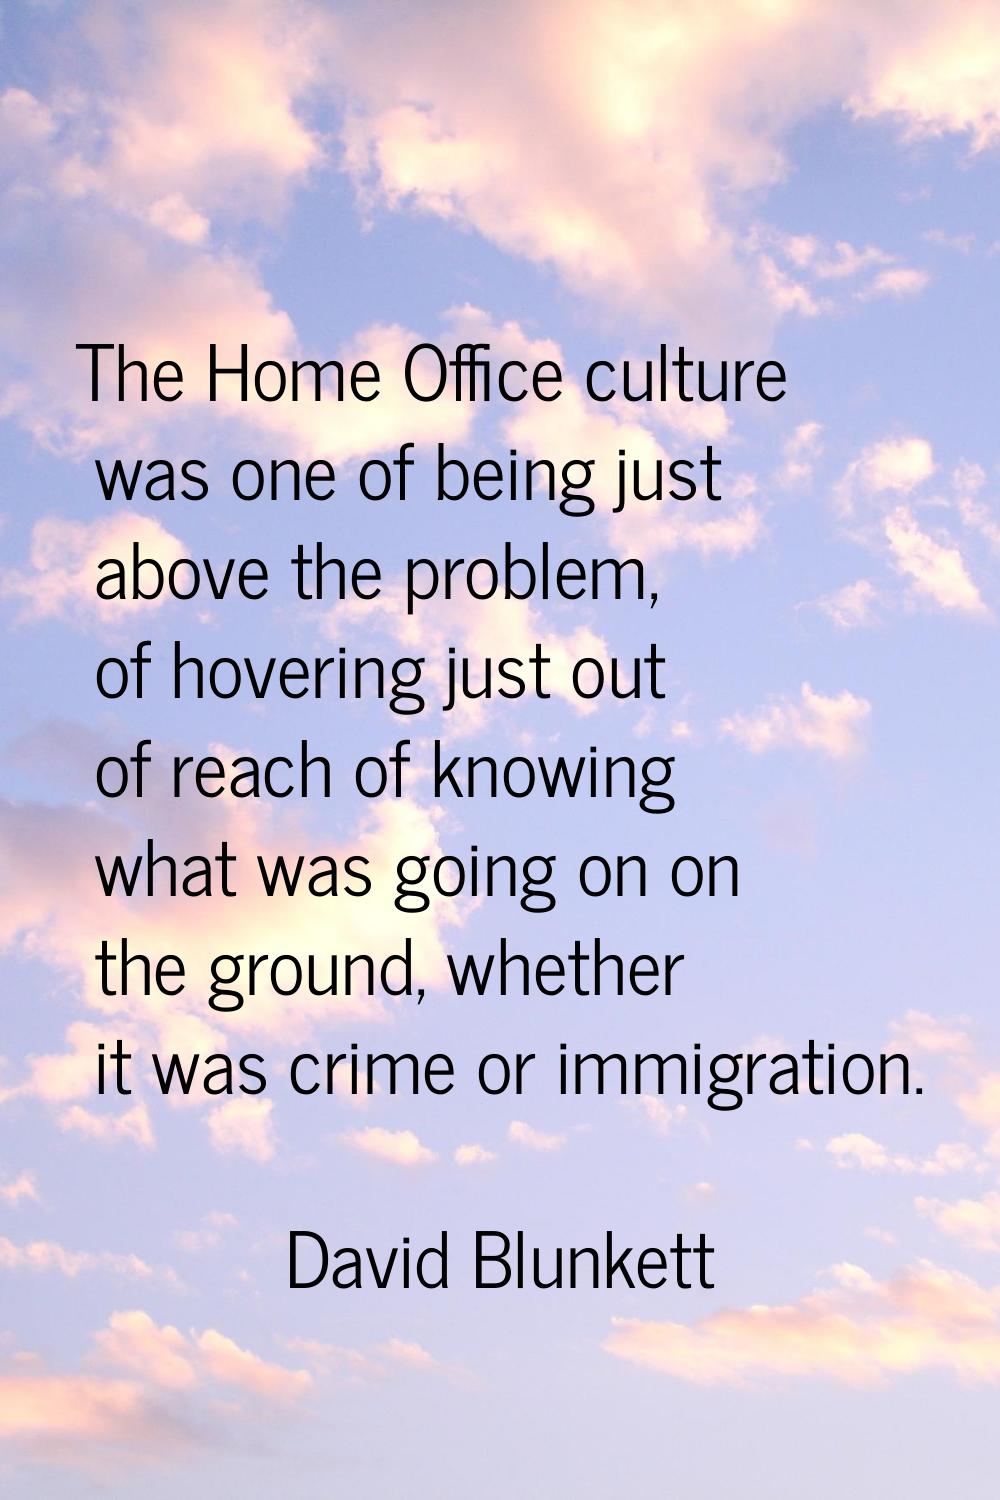 The Home Office culture was one of being just above the problem, of hovering just out of reach of k